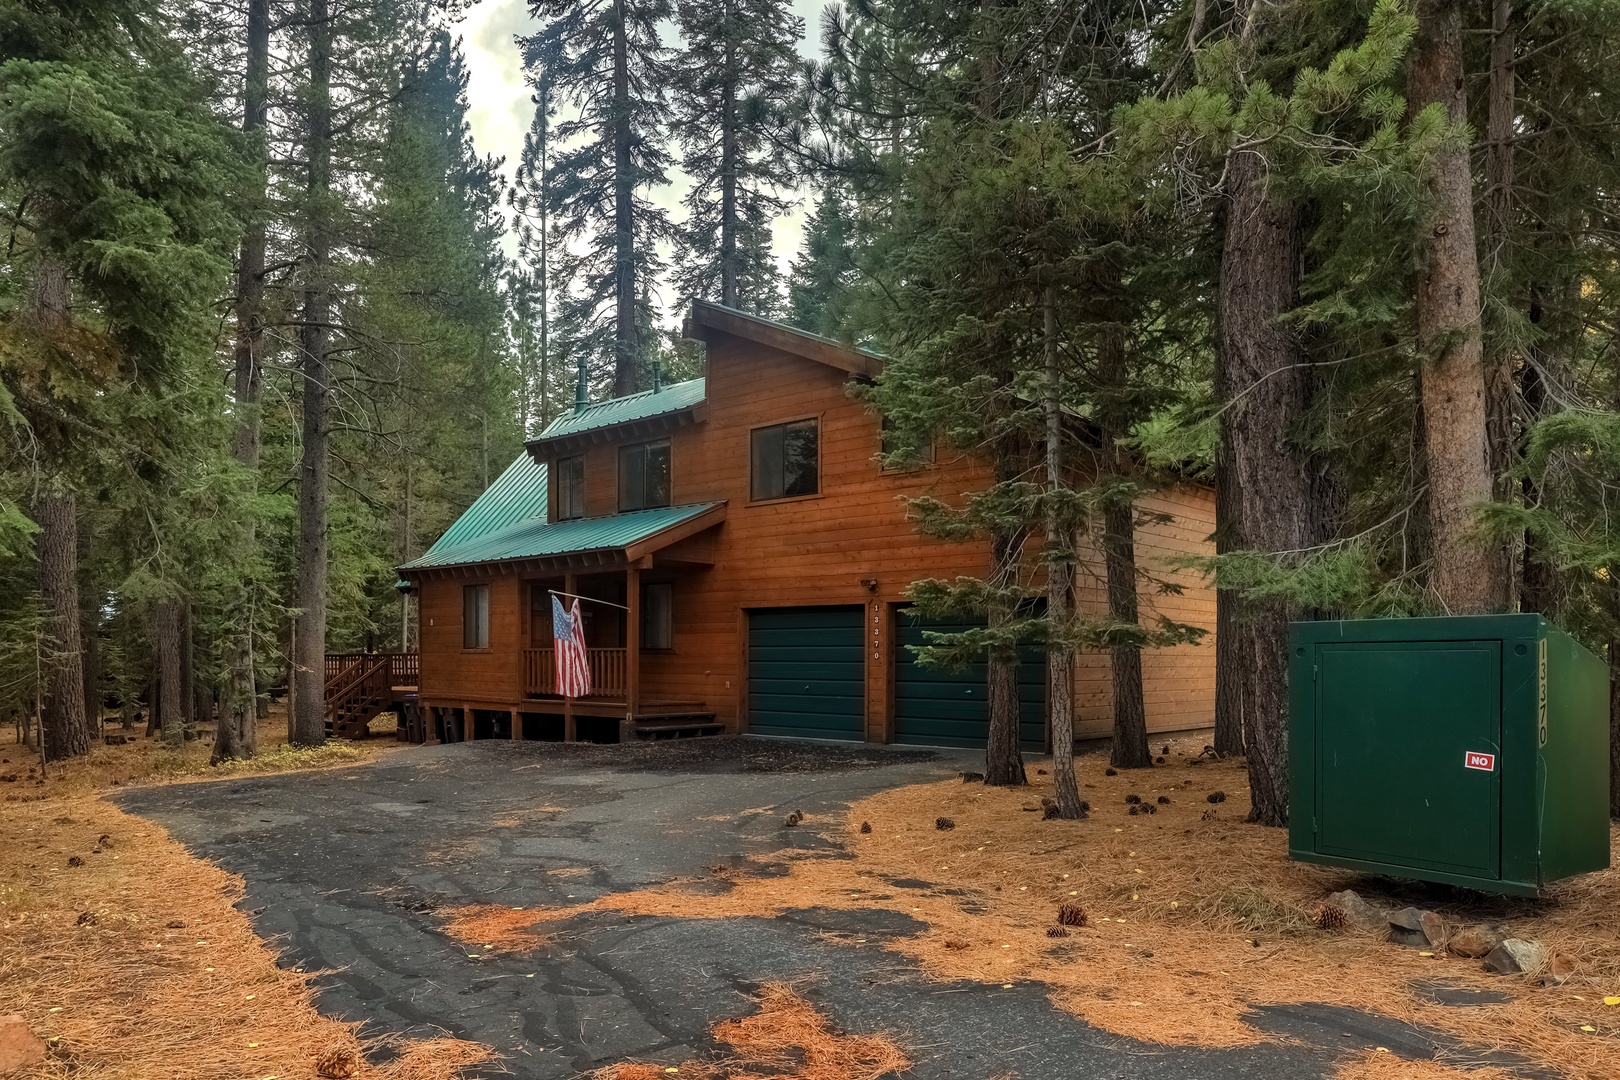 3 garage and 3 driveway parking spots, only 25 minutes to Northstar Resort